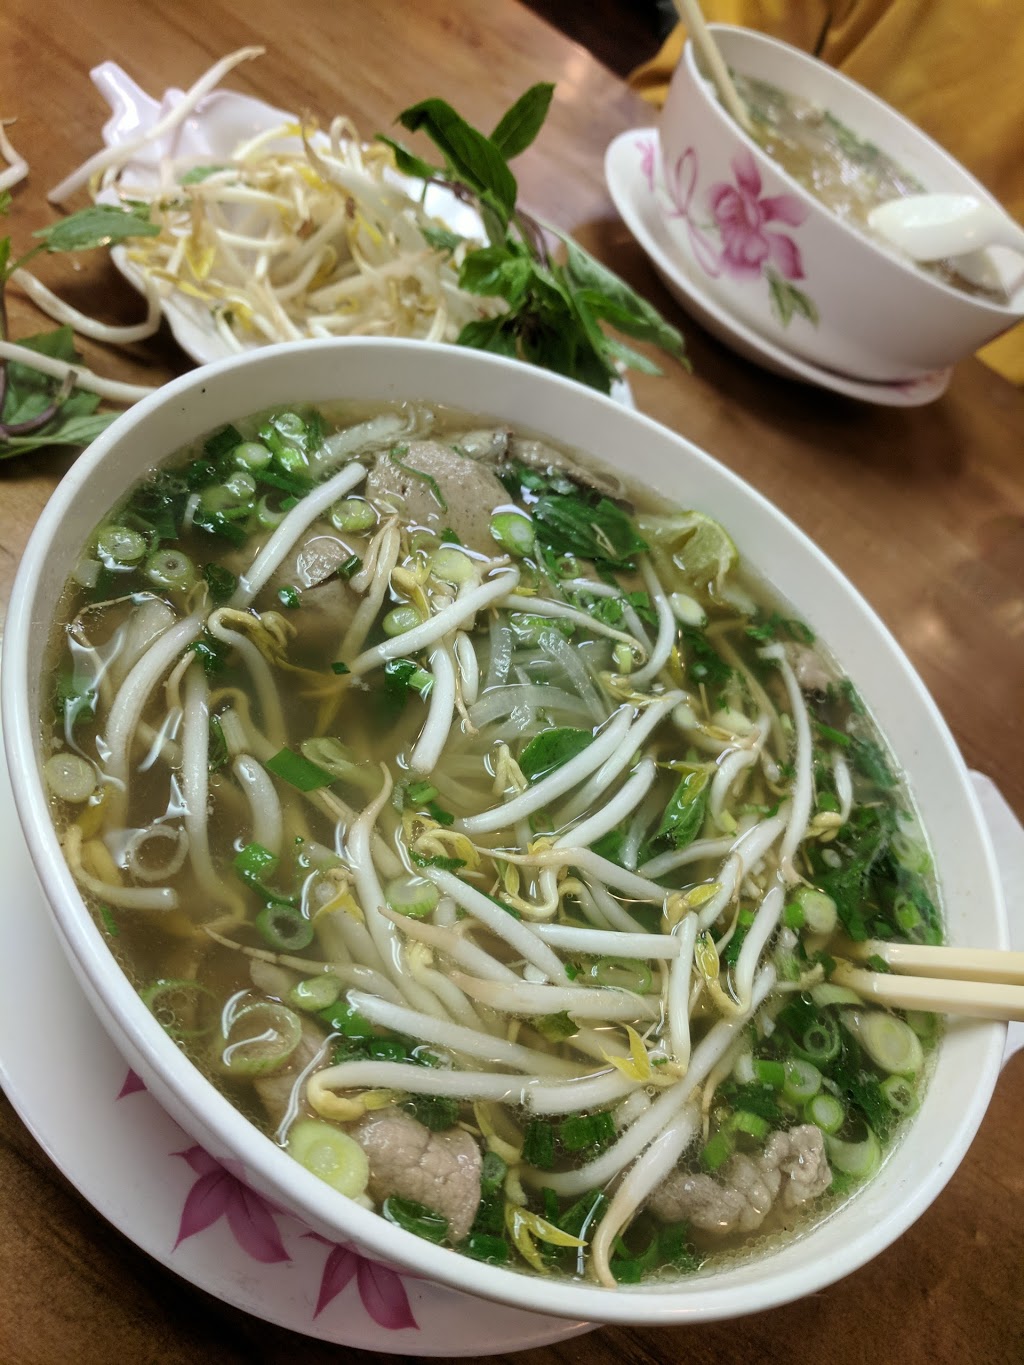 Pho King | restaurant | 9103 118 Ave NW, Edmonton, AB T5B 0T9, Canada | 7807577277 OR +1 780-757-7277